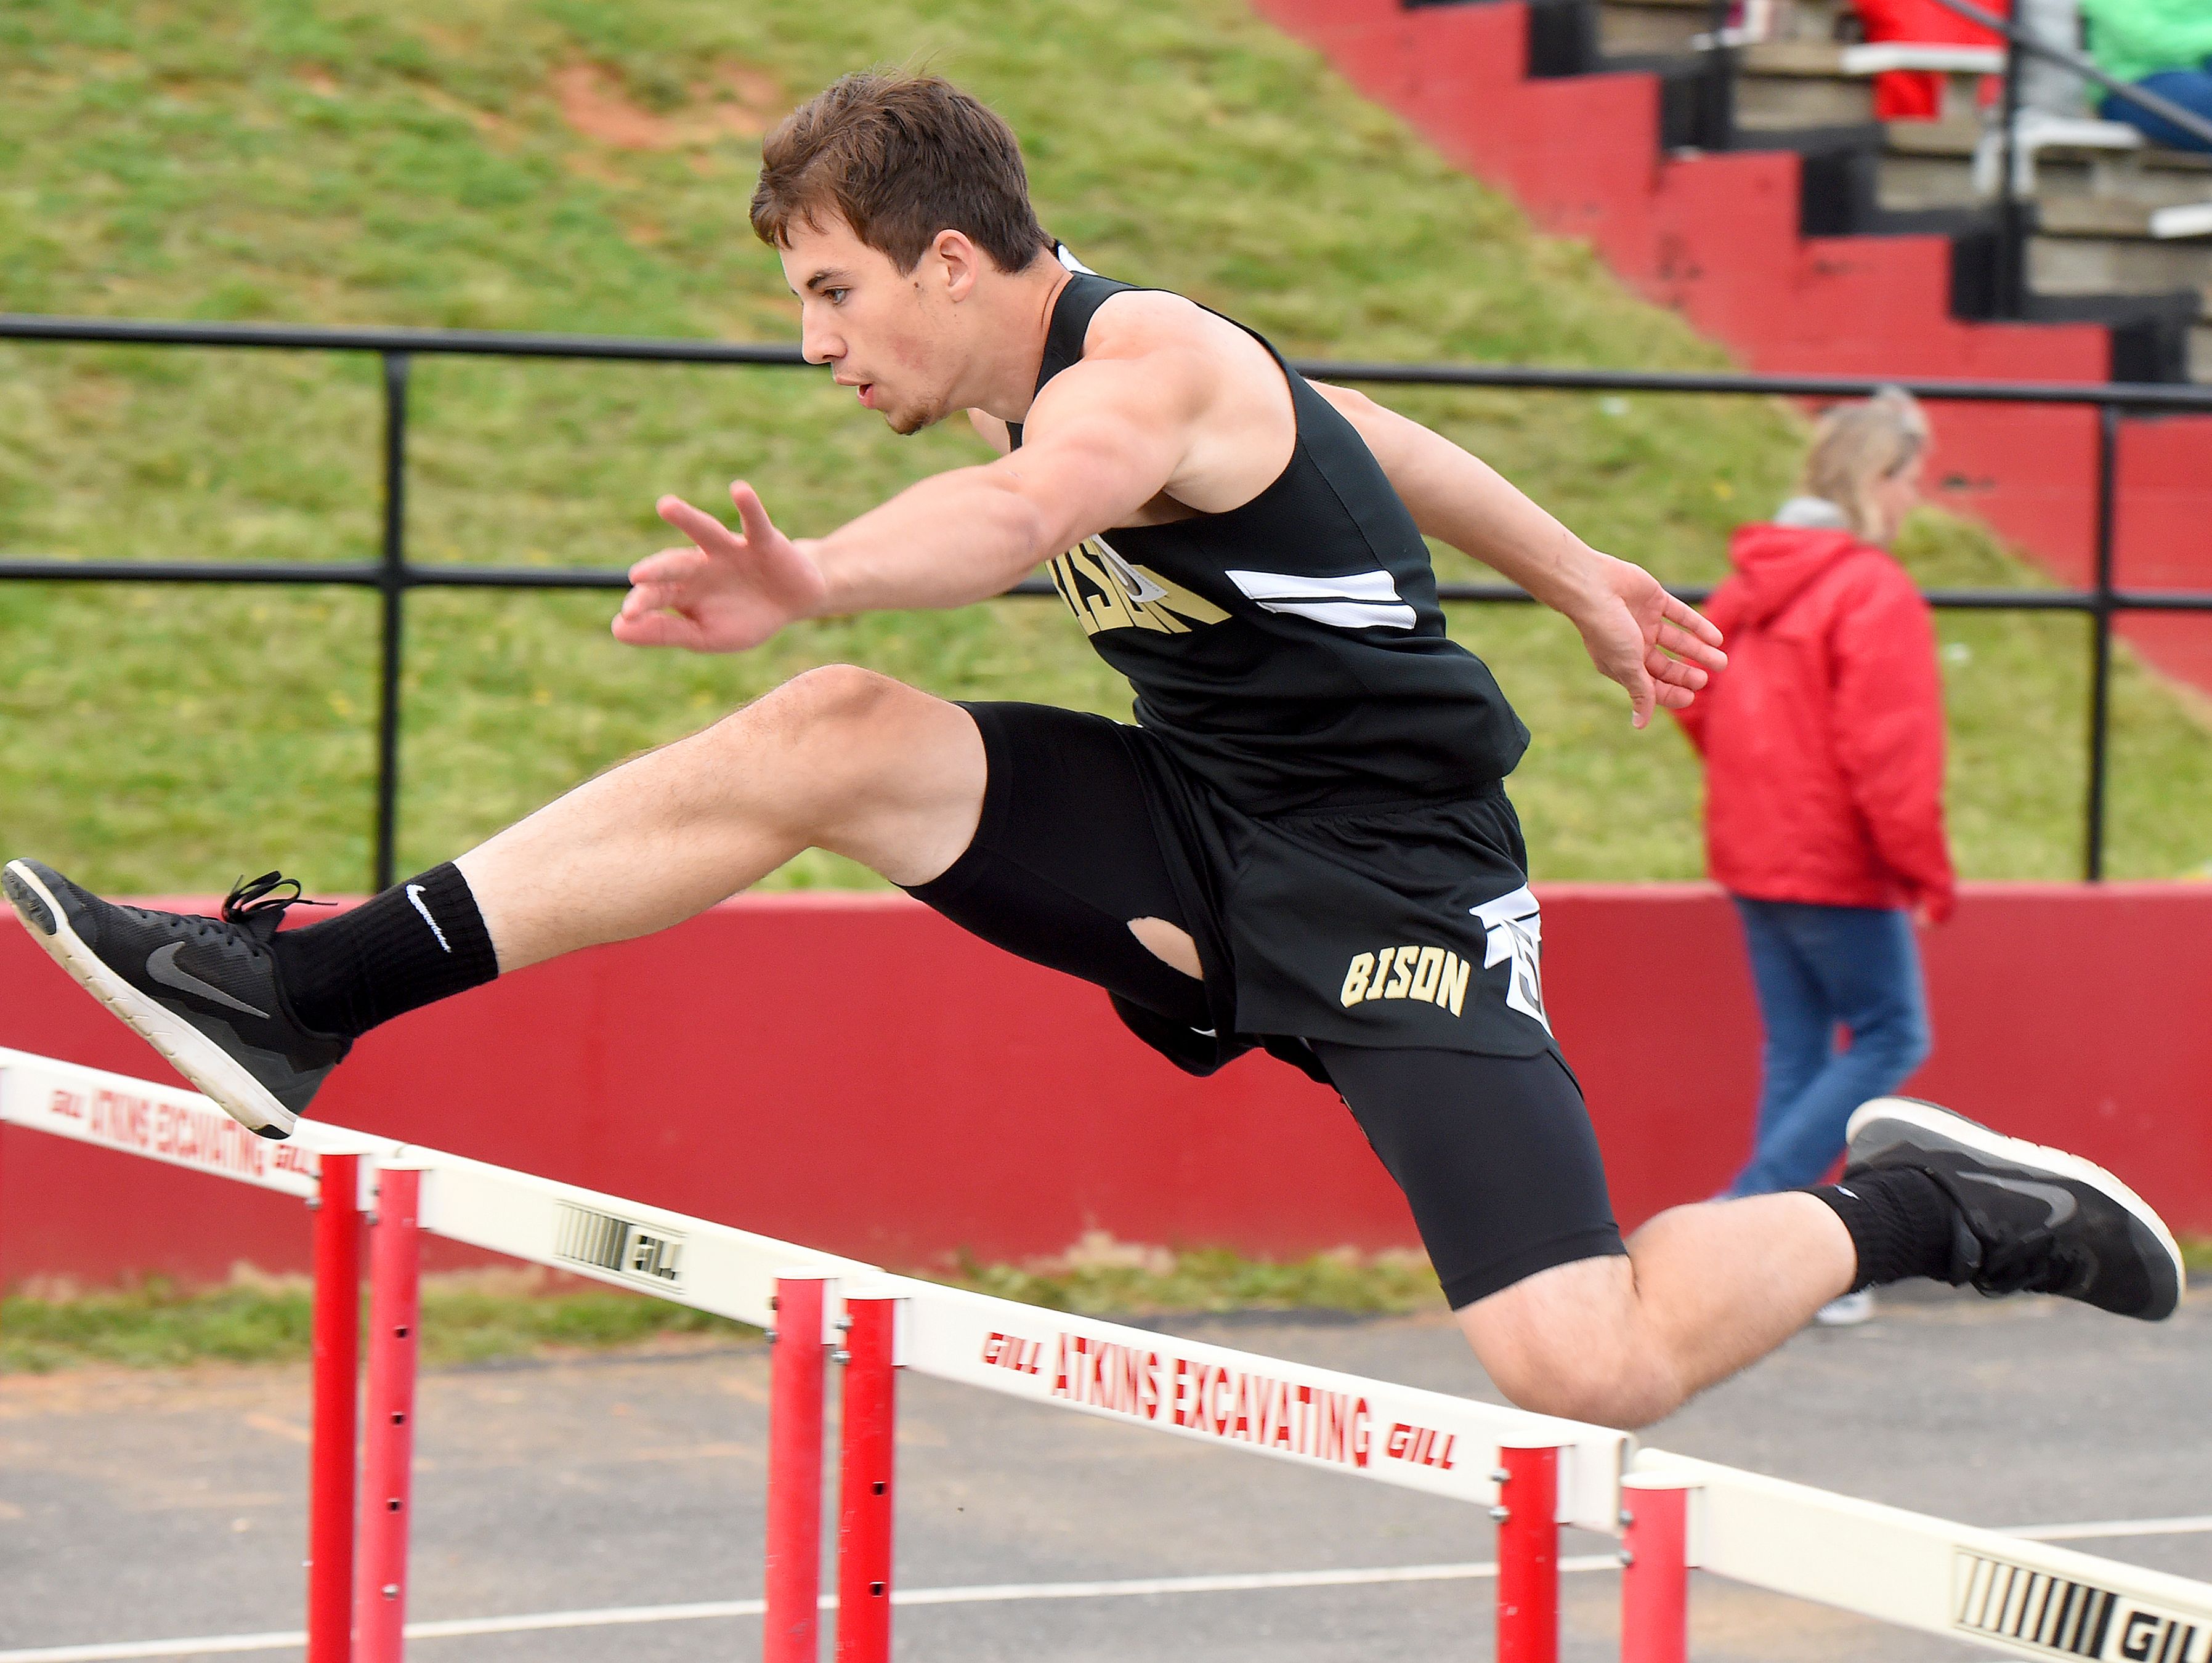 Buffalo Gap's Logan Miller clears a hurdle as he competes in the boys' 110 meter hurdles during the 28th annual Augusta County Invitational Track Meet held in Greenville on Friday, April 29, 2016.